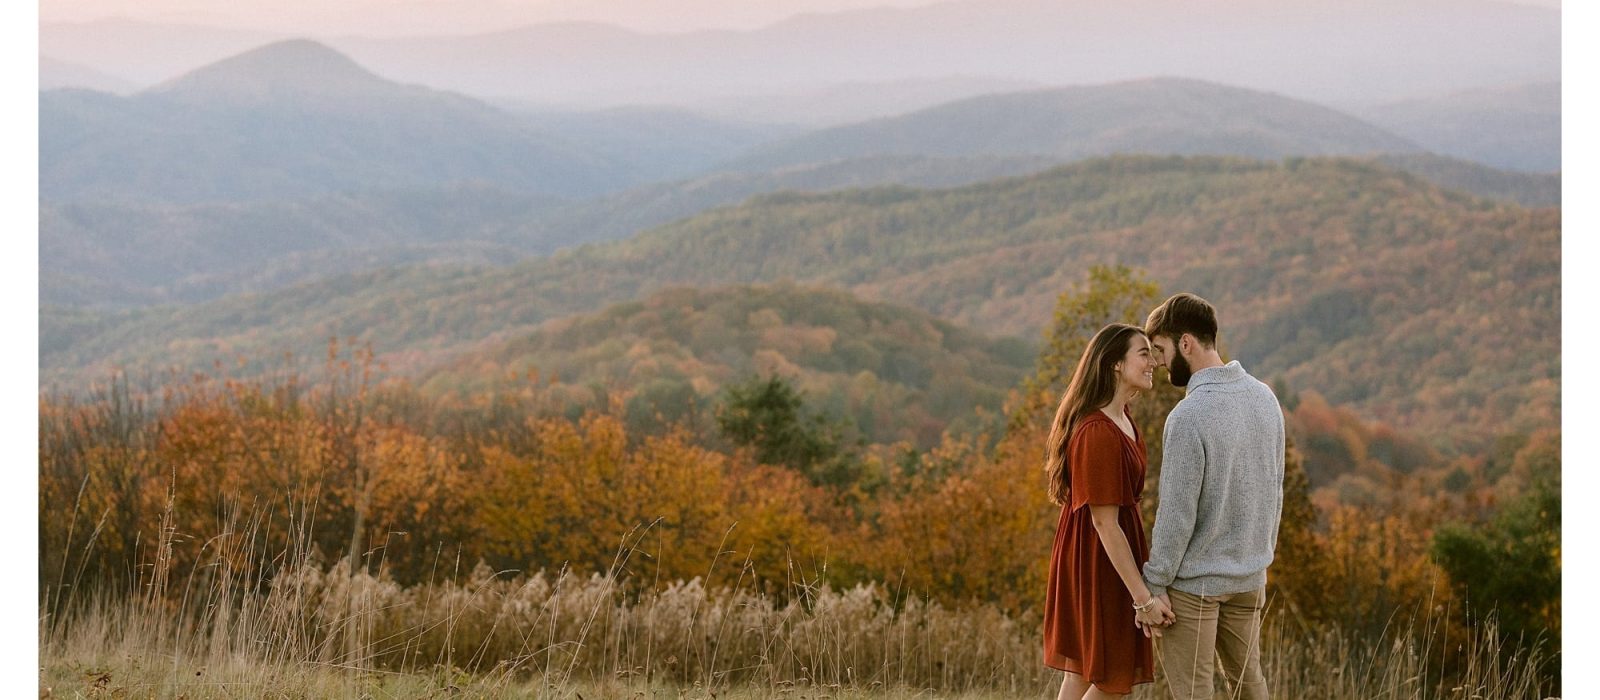 Young engaged couple kissing in golden grassy autumn field at sunset over looking mountain range